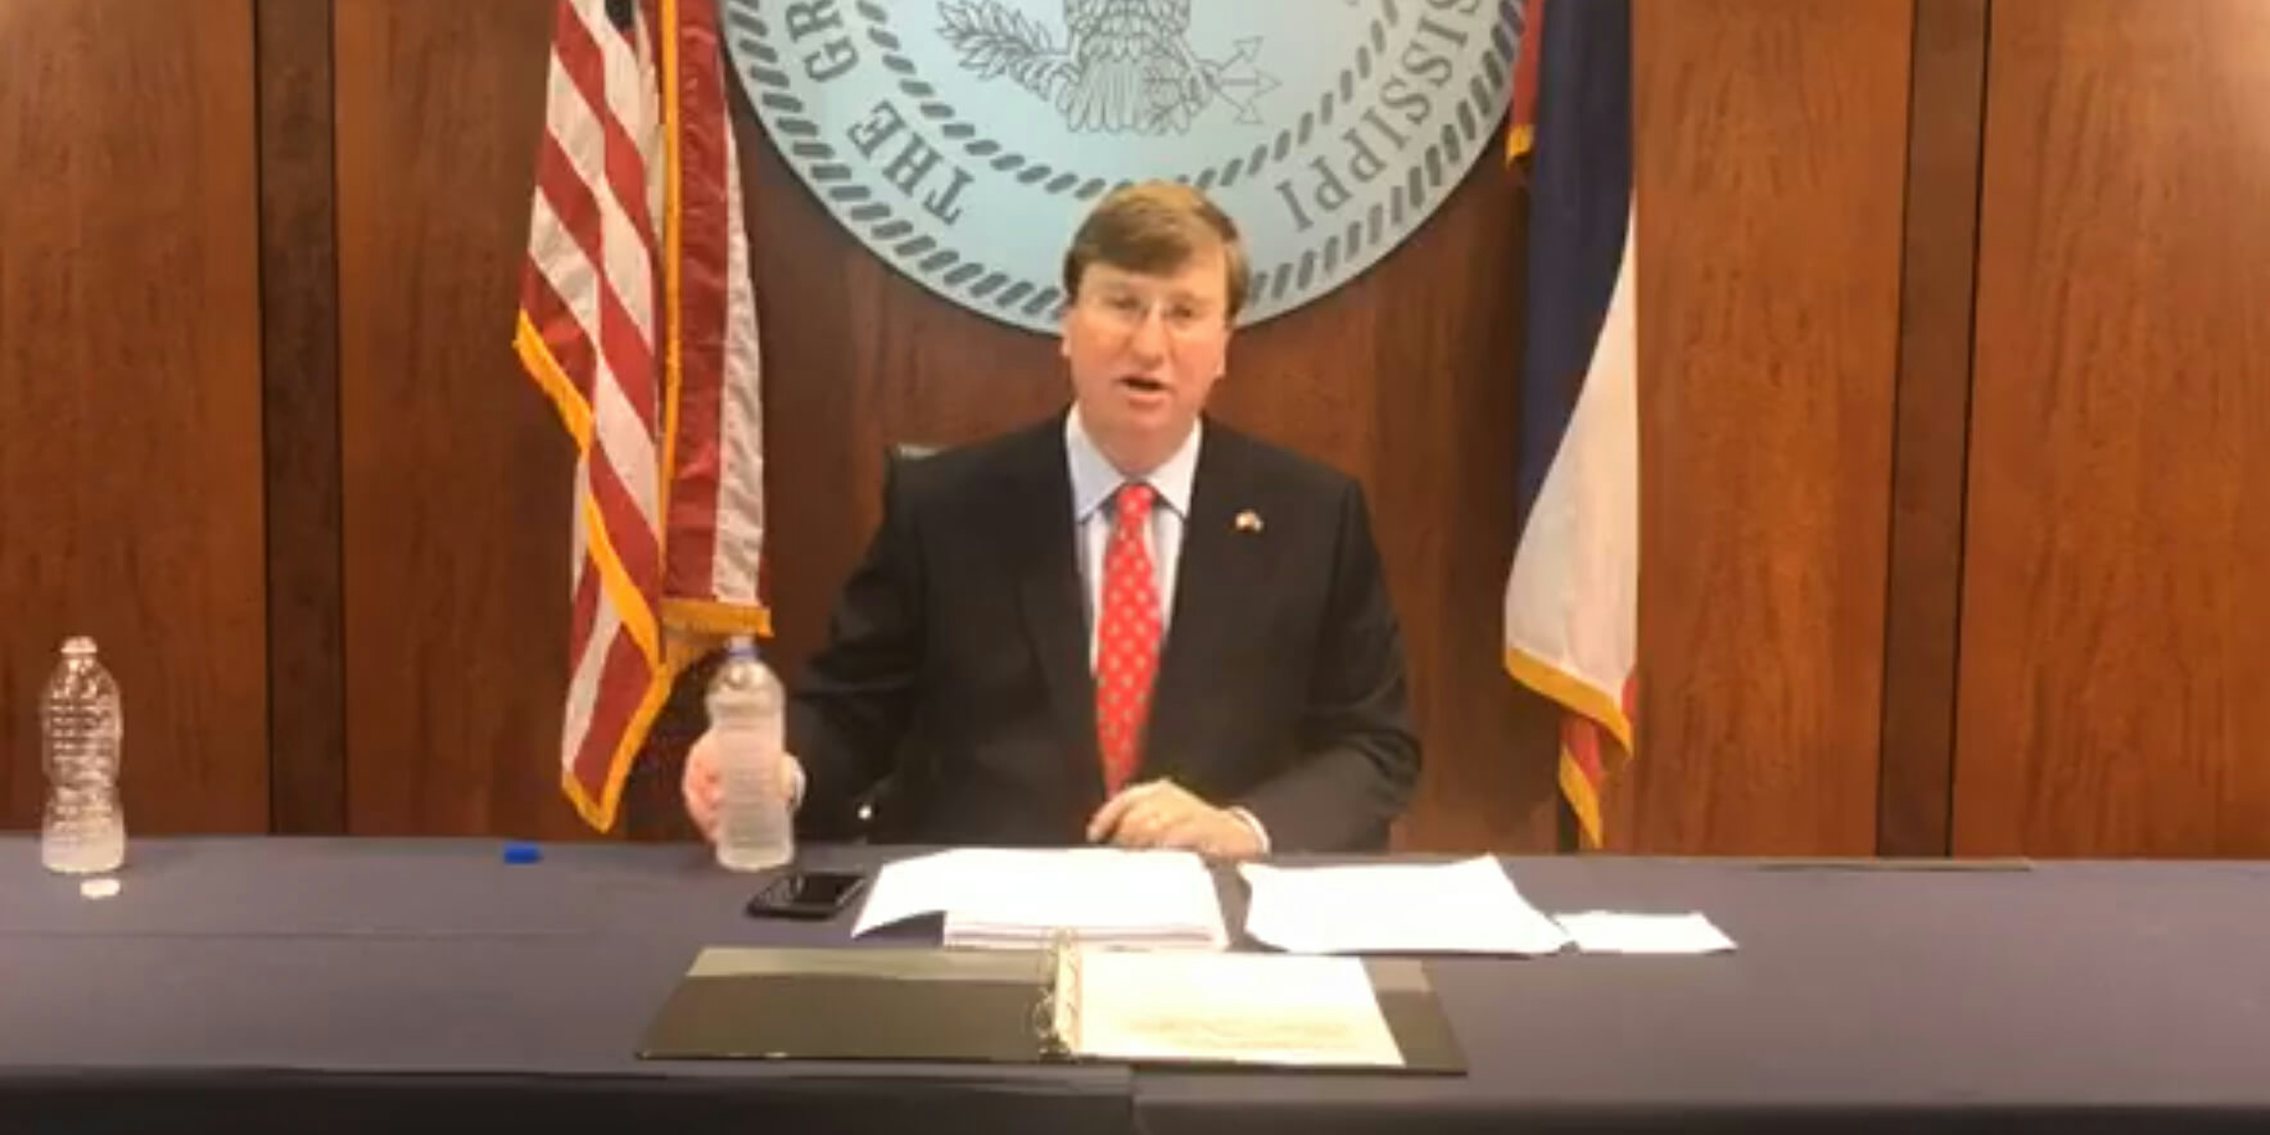 Mississippi Governor Tate Reeves Harry Azcrac